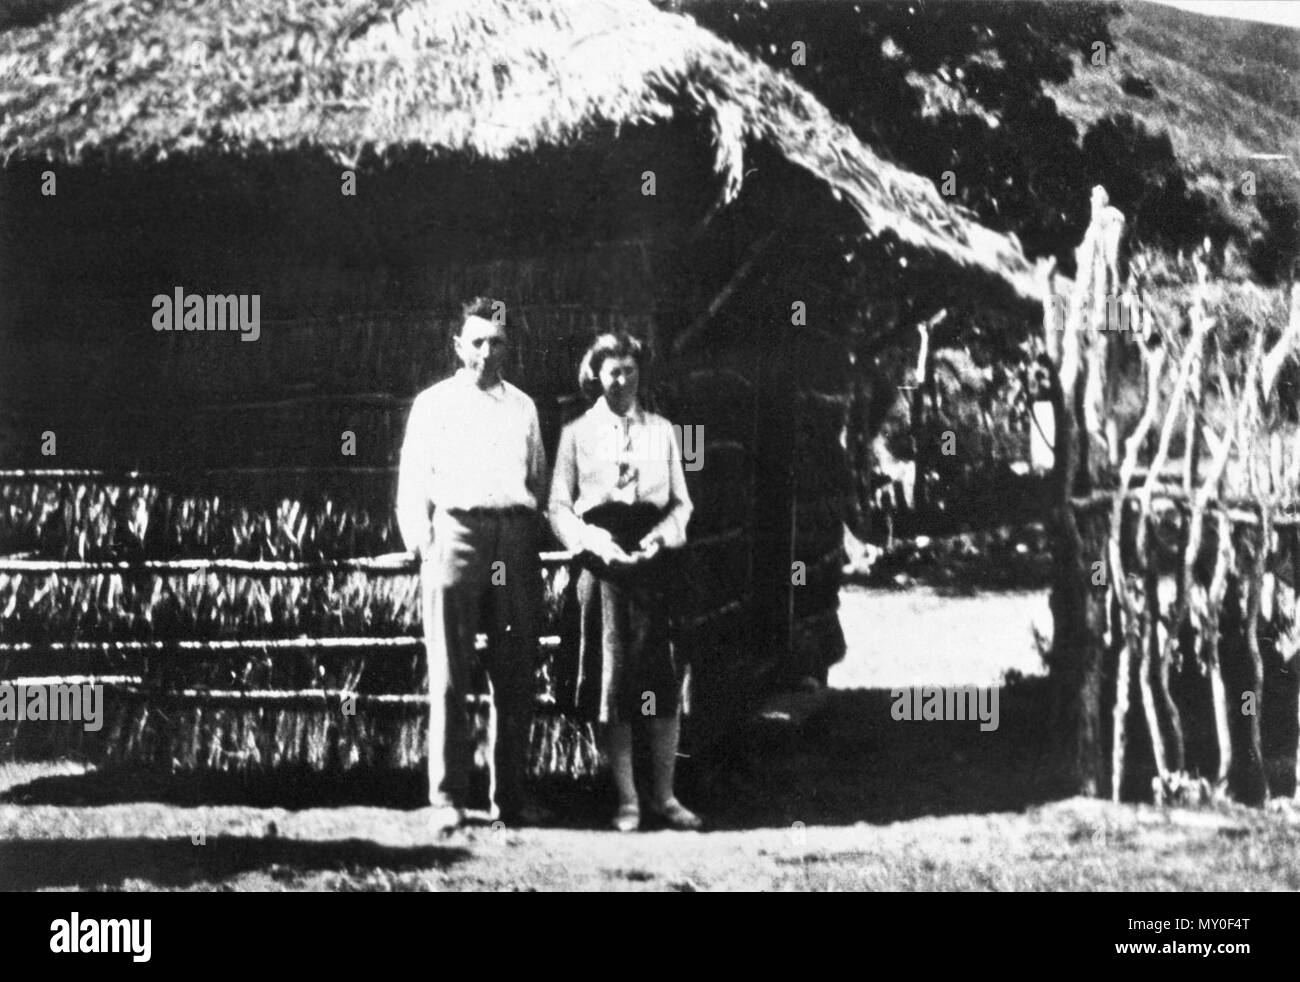 A typical Grass Hut, Lindeman Island, c 1931. LINDEMAN ISLAND. 172794588?searchTerm=grass hut lindeman island&amp;searchLimits=l-state=Queensland )   Tourists Delighted.  Further praise of Lindeman Island was given by tourists who returned from Lindeman Island by the ketch Tonka on Friday evening. Among those who returned were Mrs. F. E. Shortt, Misses A. and K. Sheldon, Edith Webster, and S. Frederiksen, of Brisbane.  It is one of the most glorious of places, said Miss A. Sheldon. Miss Sheldon, who has been to Cairns previously, and also has travelled Europe, said she did not believe Lindeman Stock Photo